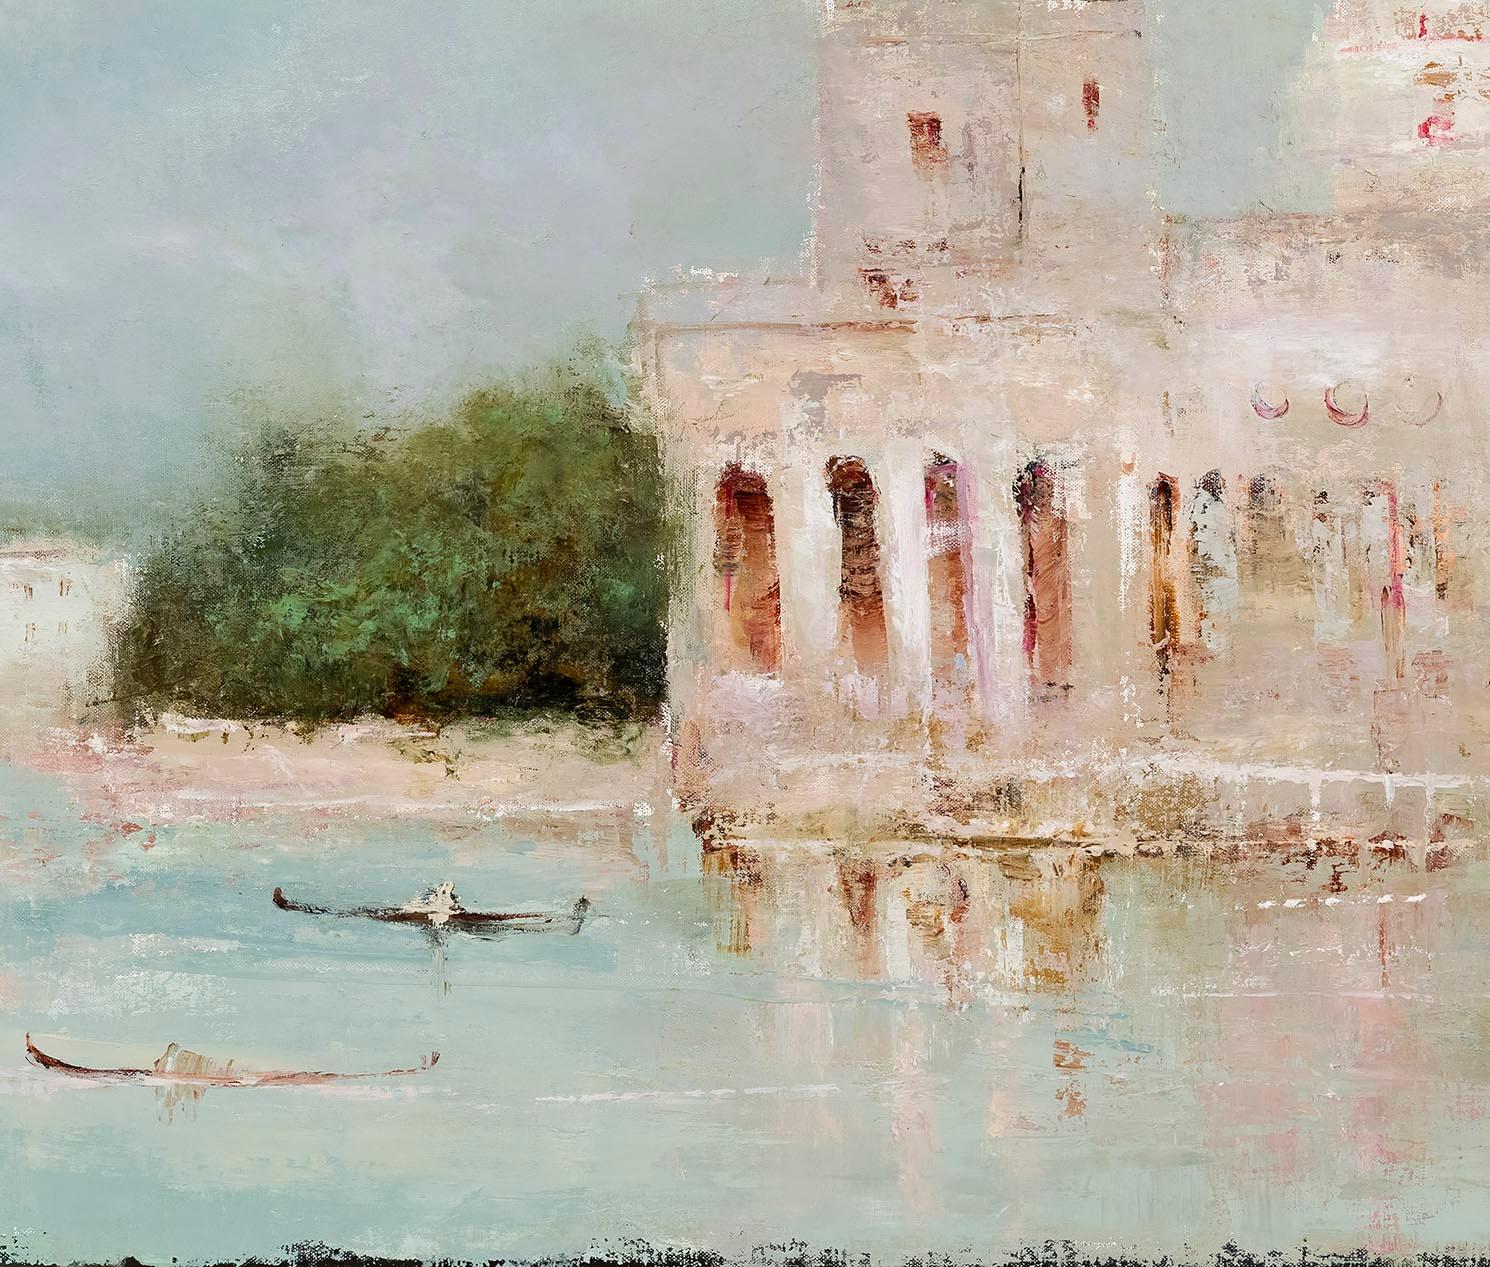 Dreams Browse From the Shore - Painting by France Jodoin